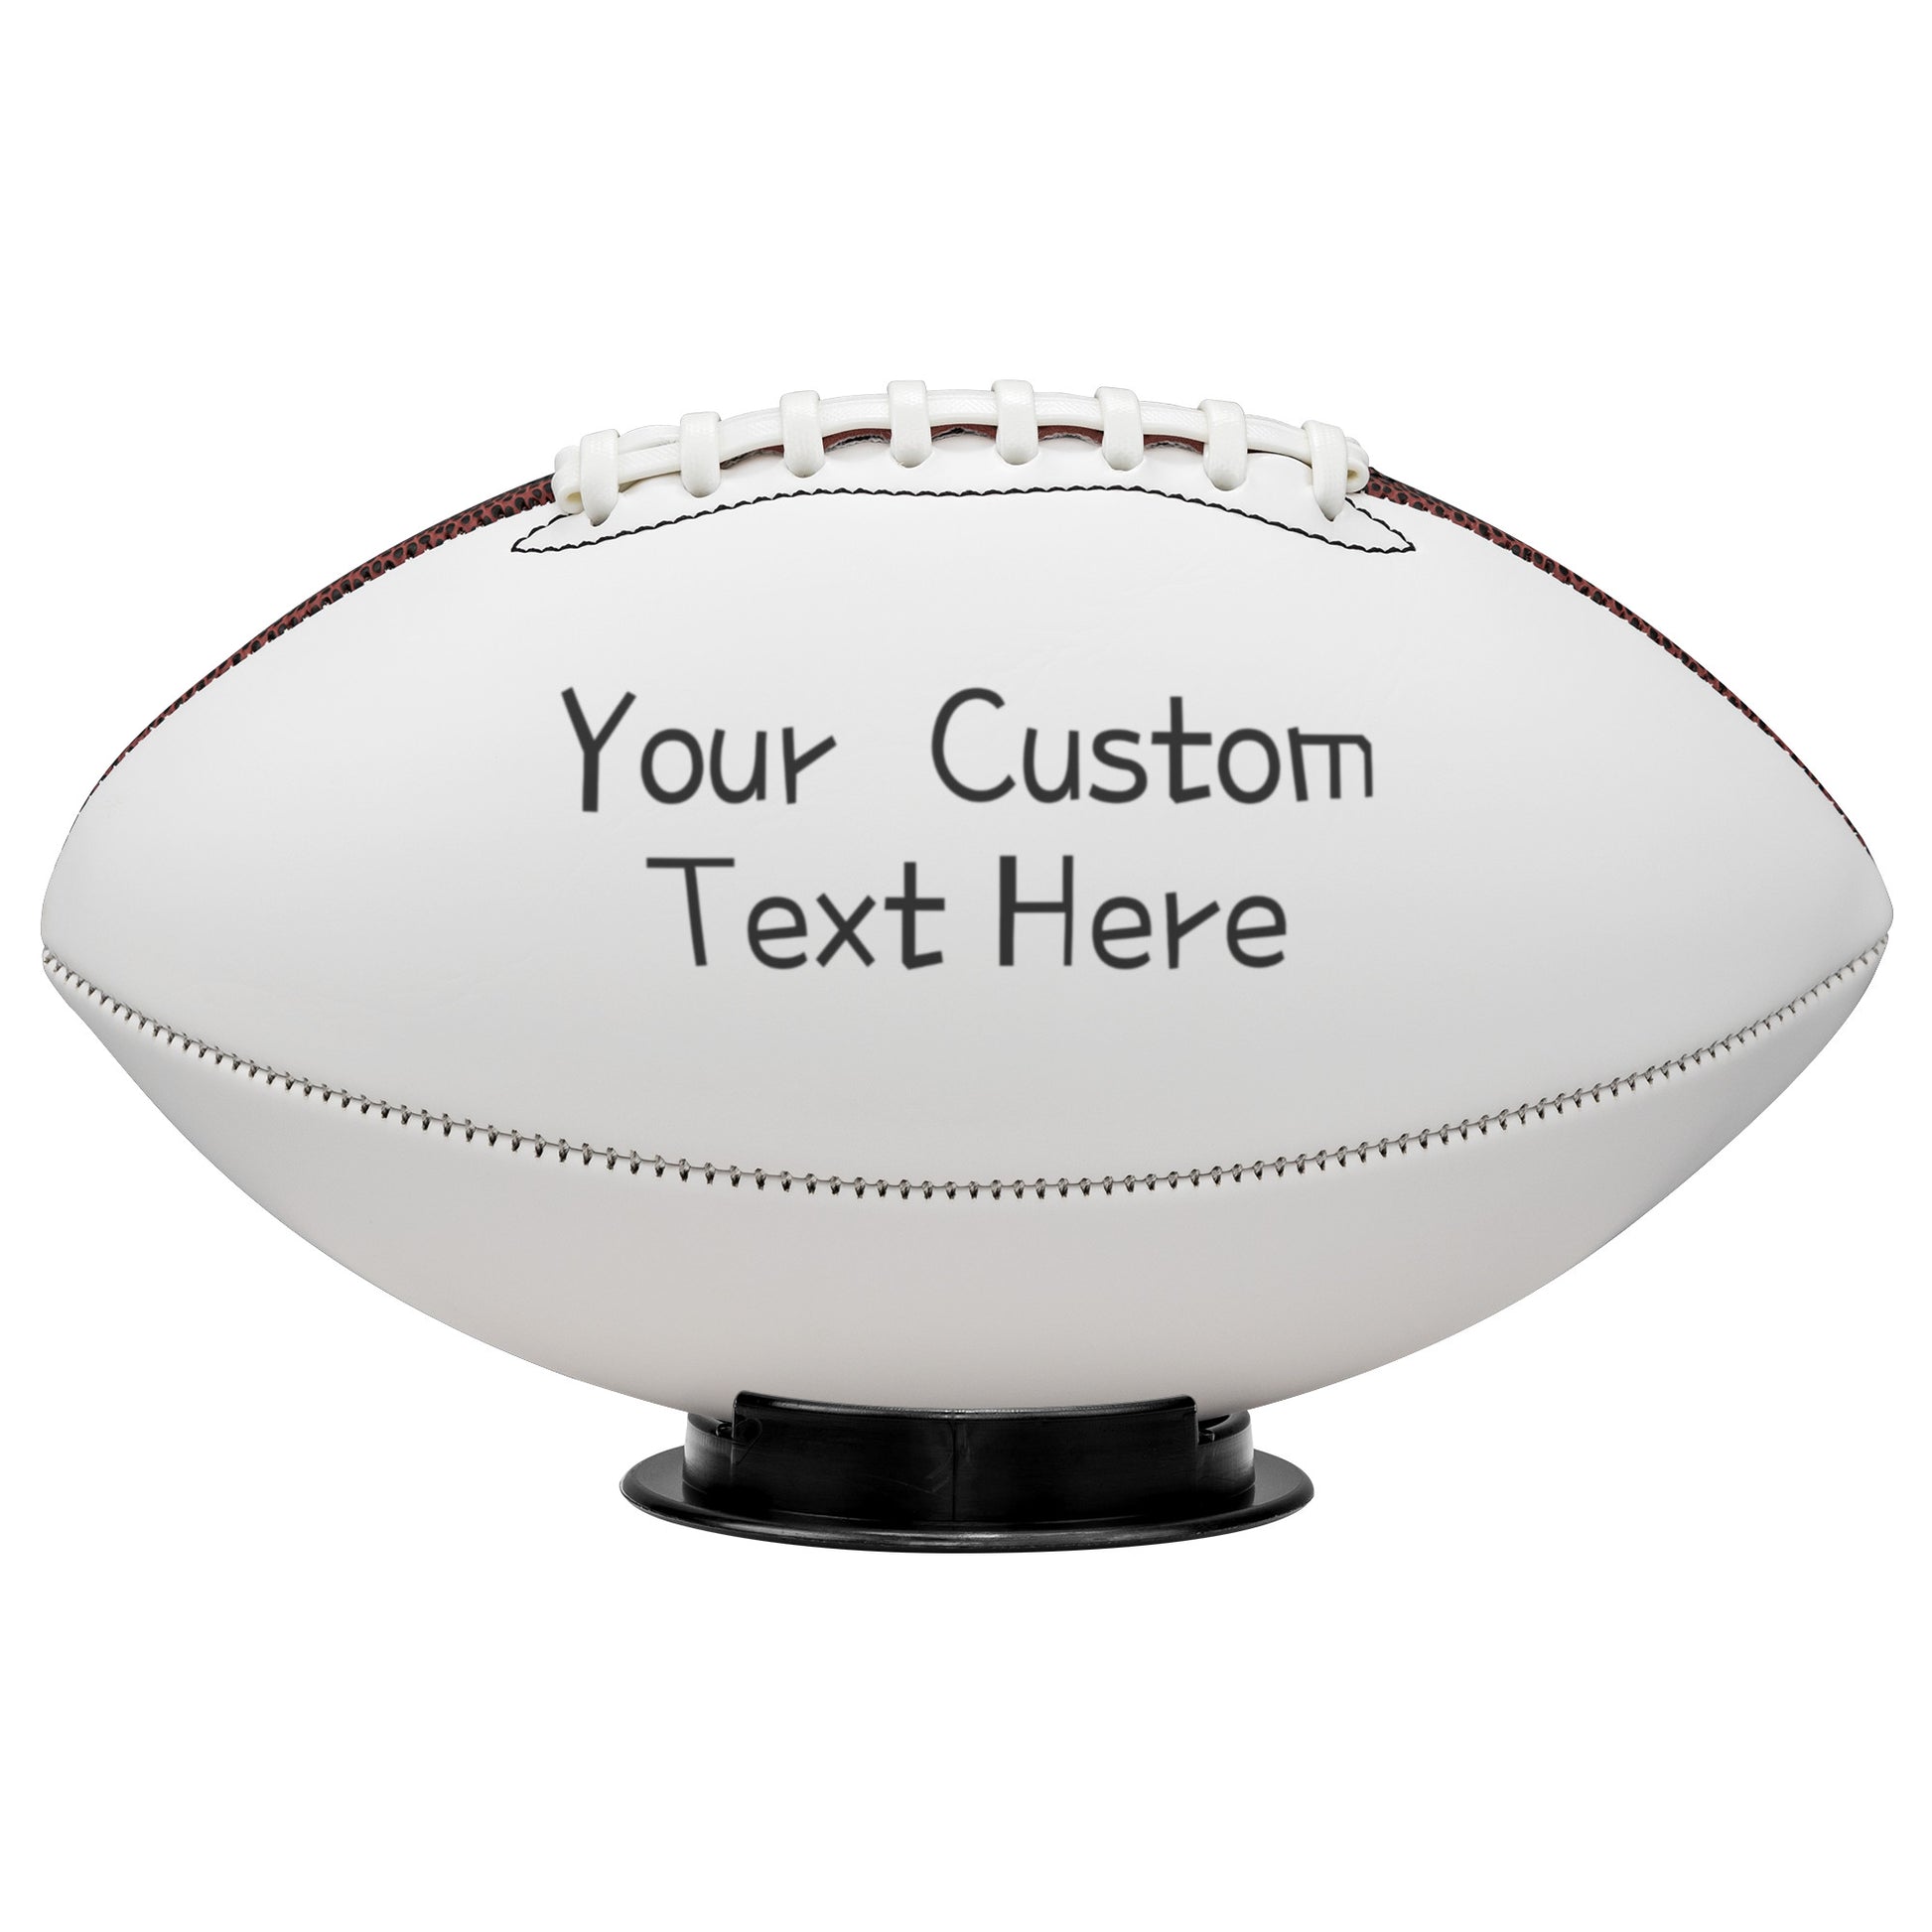 "Customized" Football - Weave Got Gifts - Unique Gifts You Won’t Find Anywhere Else!